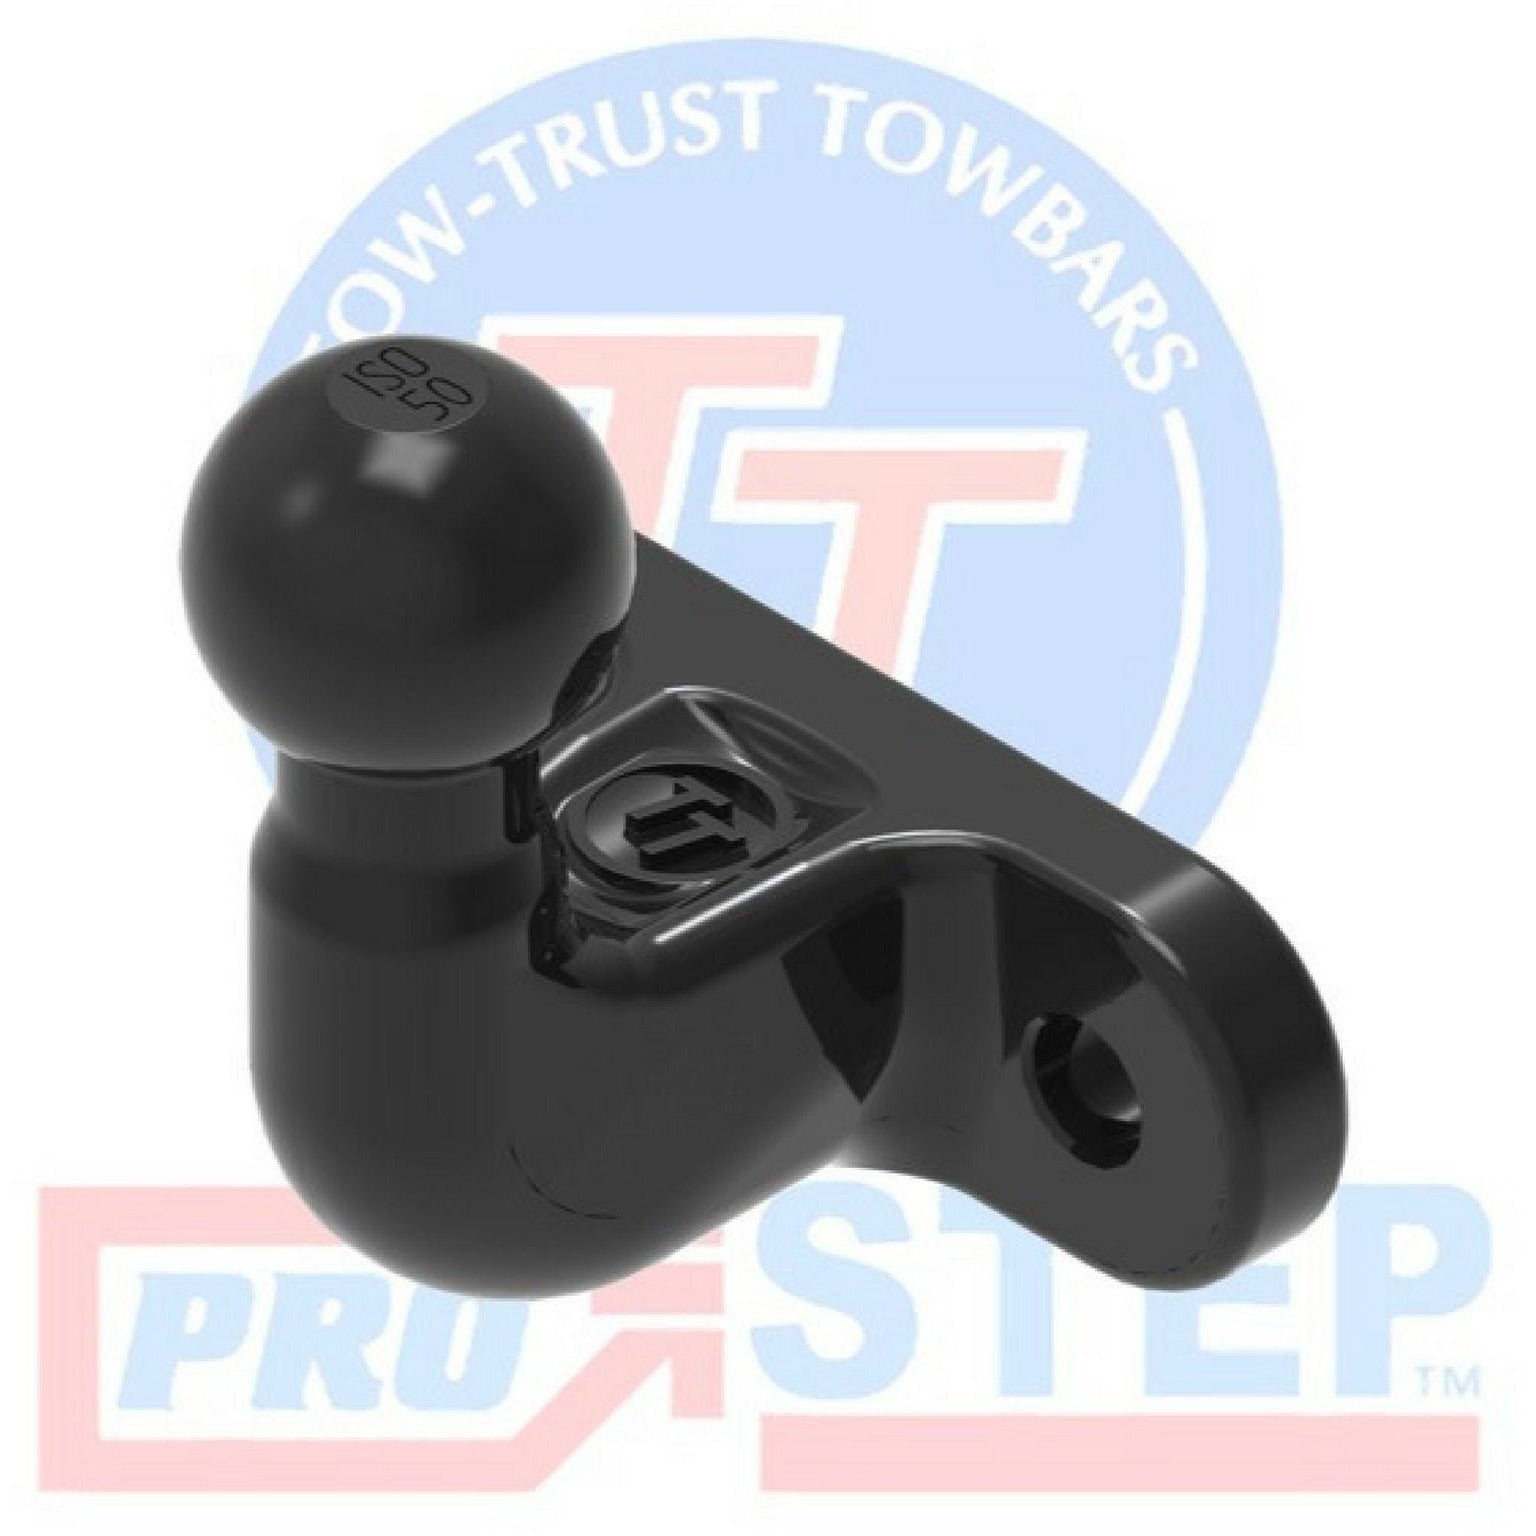 Tow Trust Autotrail Towbar (TAUT3) - Quality Caravan Awnings